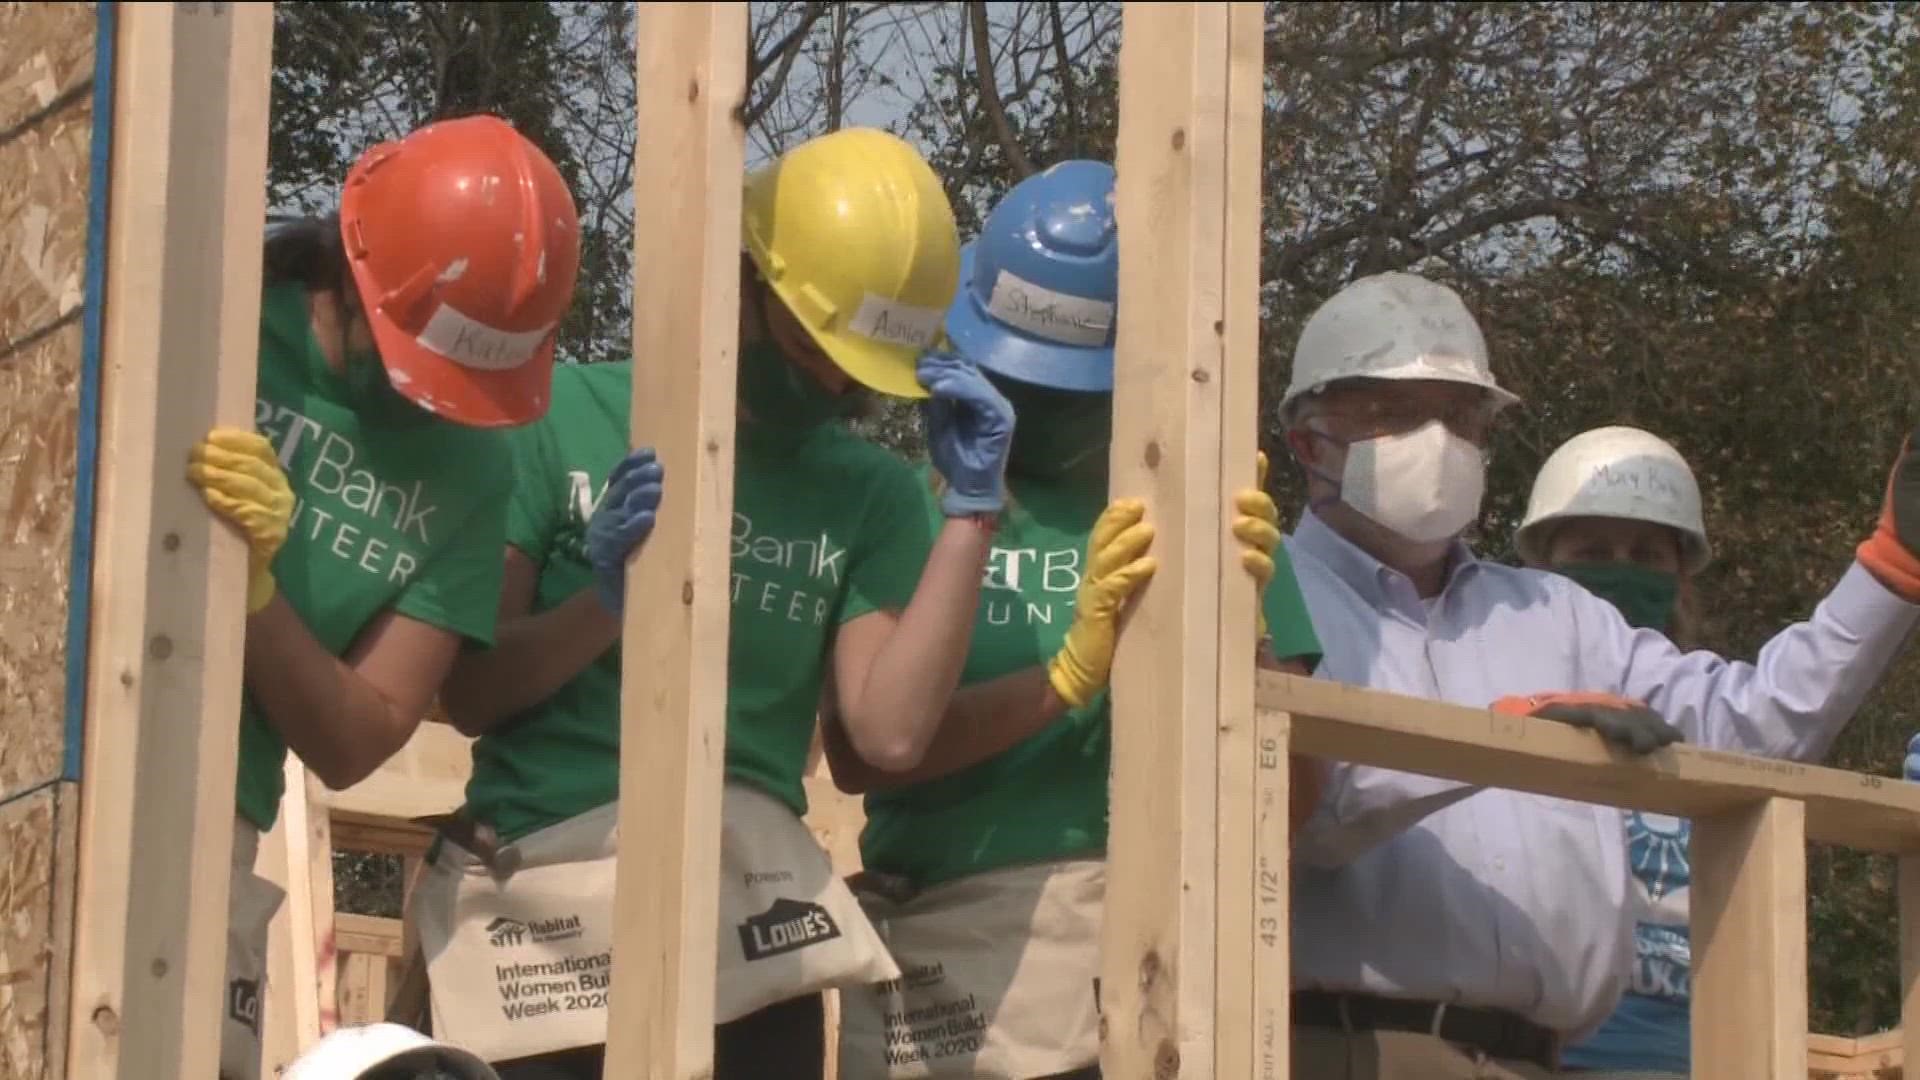 "There are beautiful people in our community that are suffering," North ETX Habitat for Humanity CEO LaJuan Gordon said.